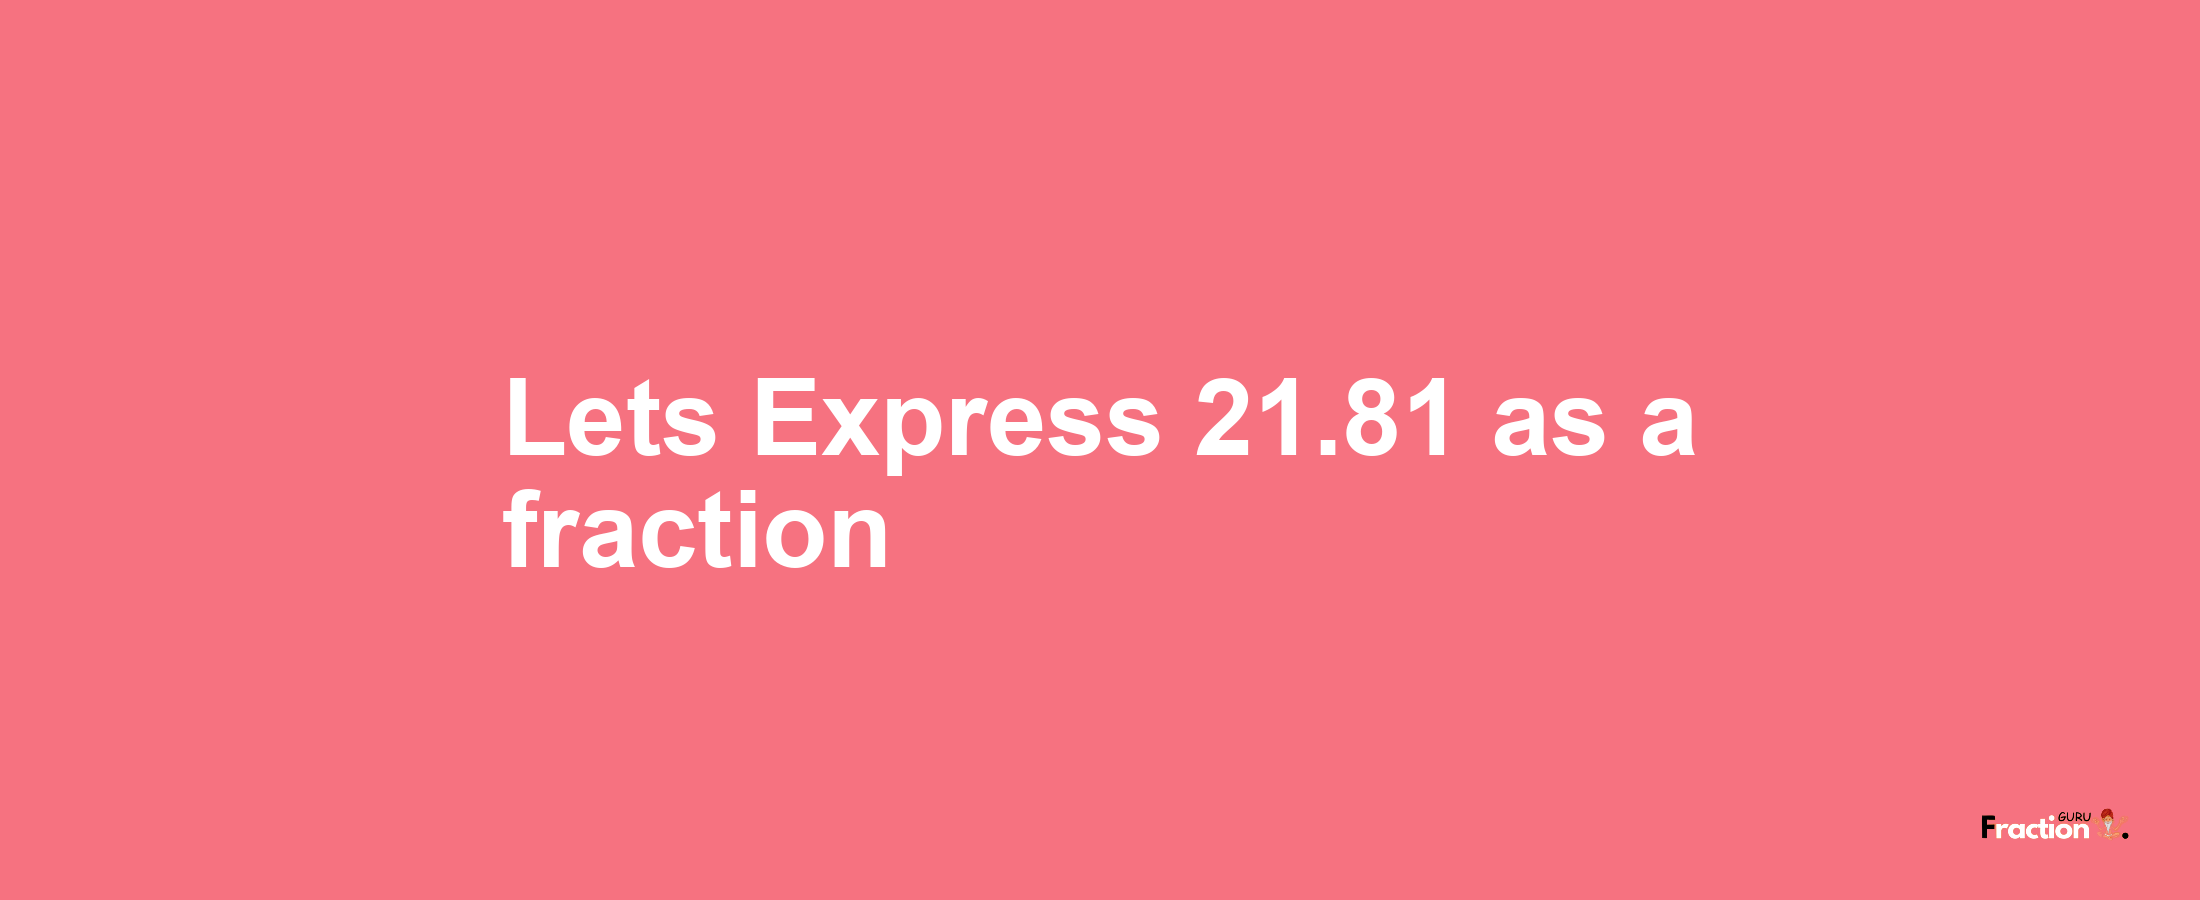 Lets Express 21.81 as afraction